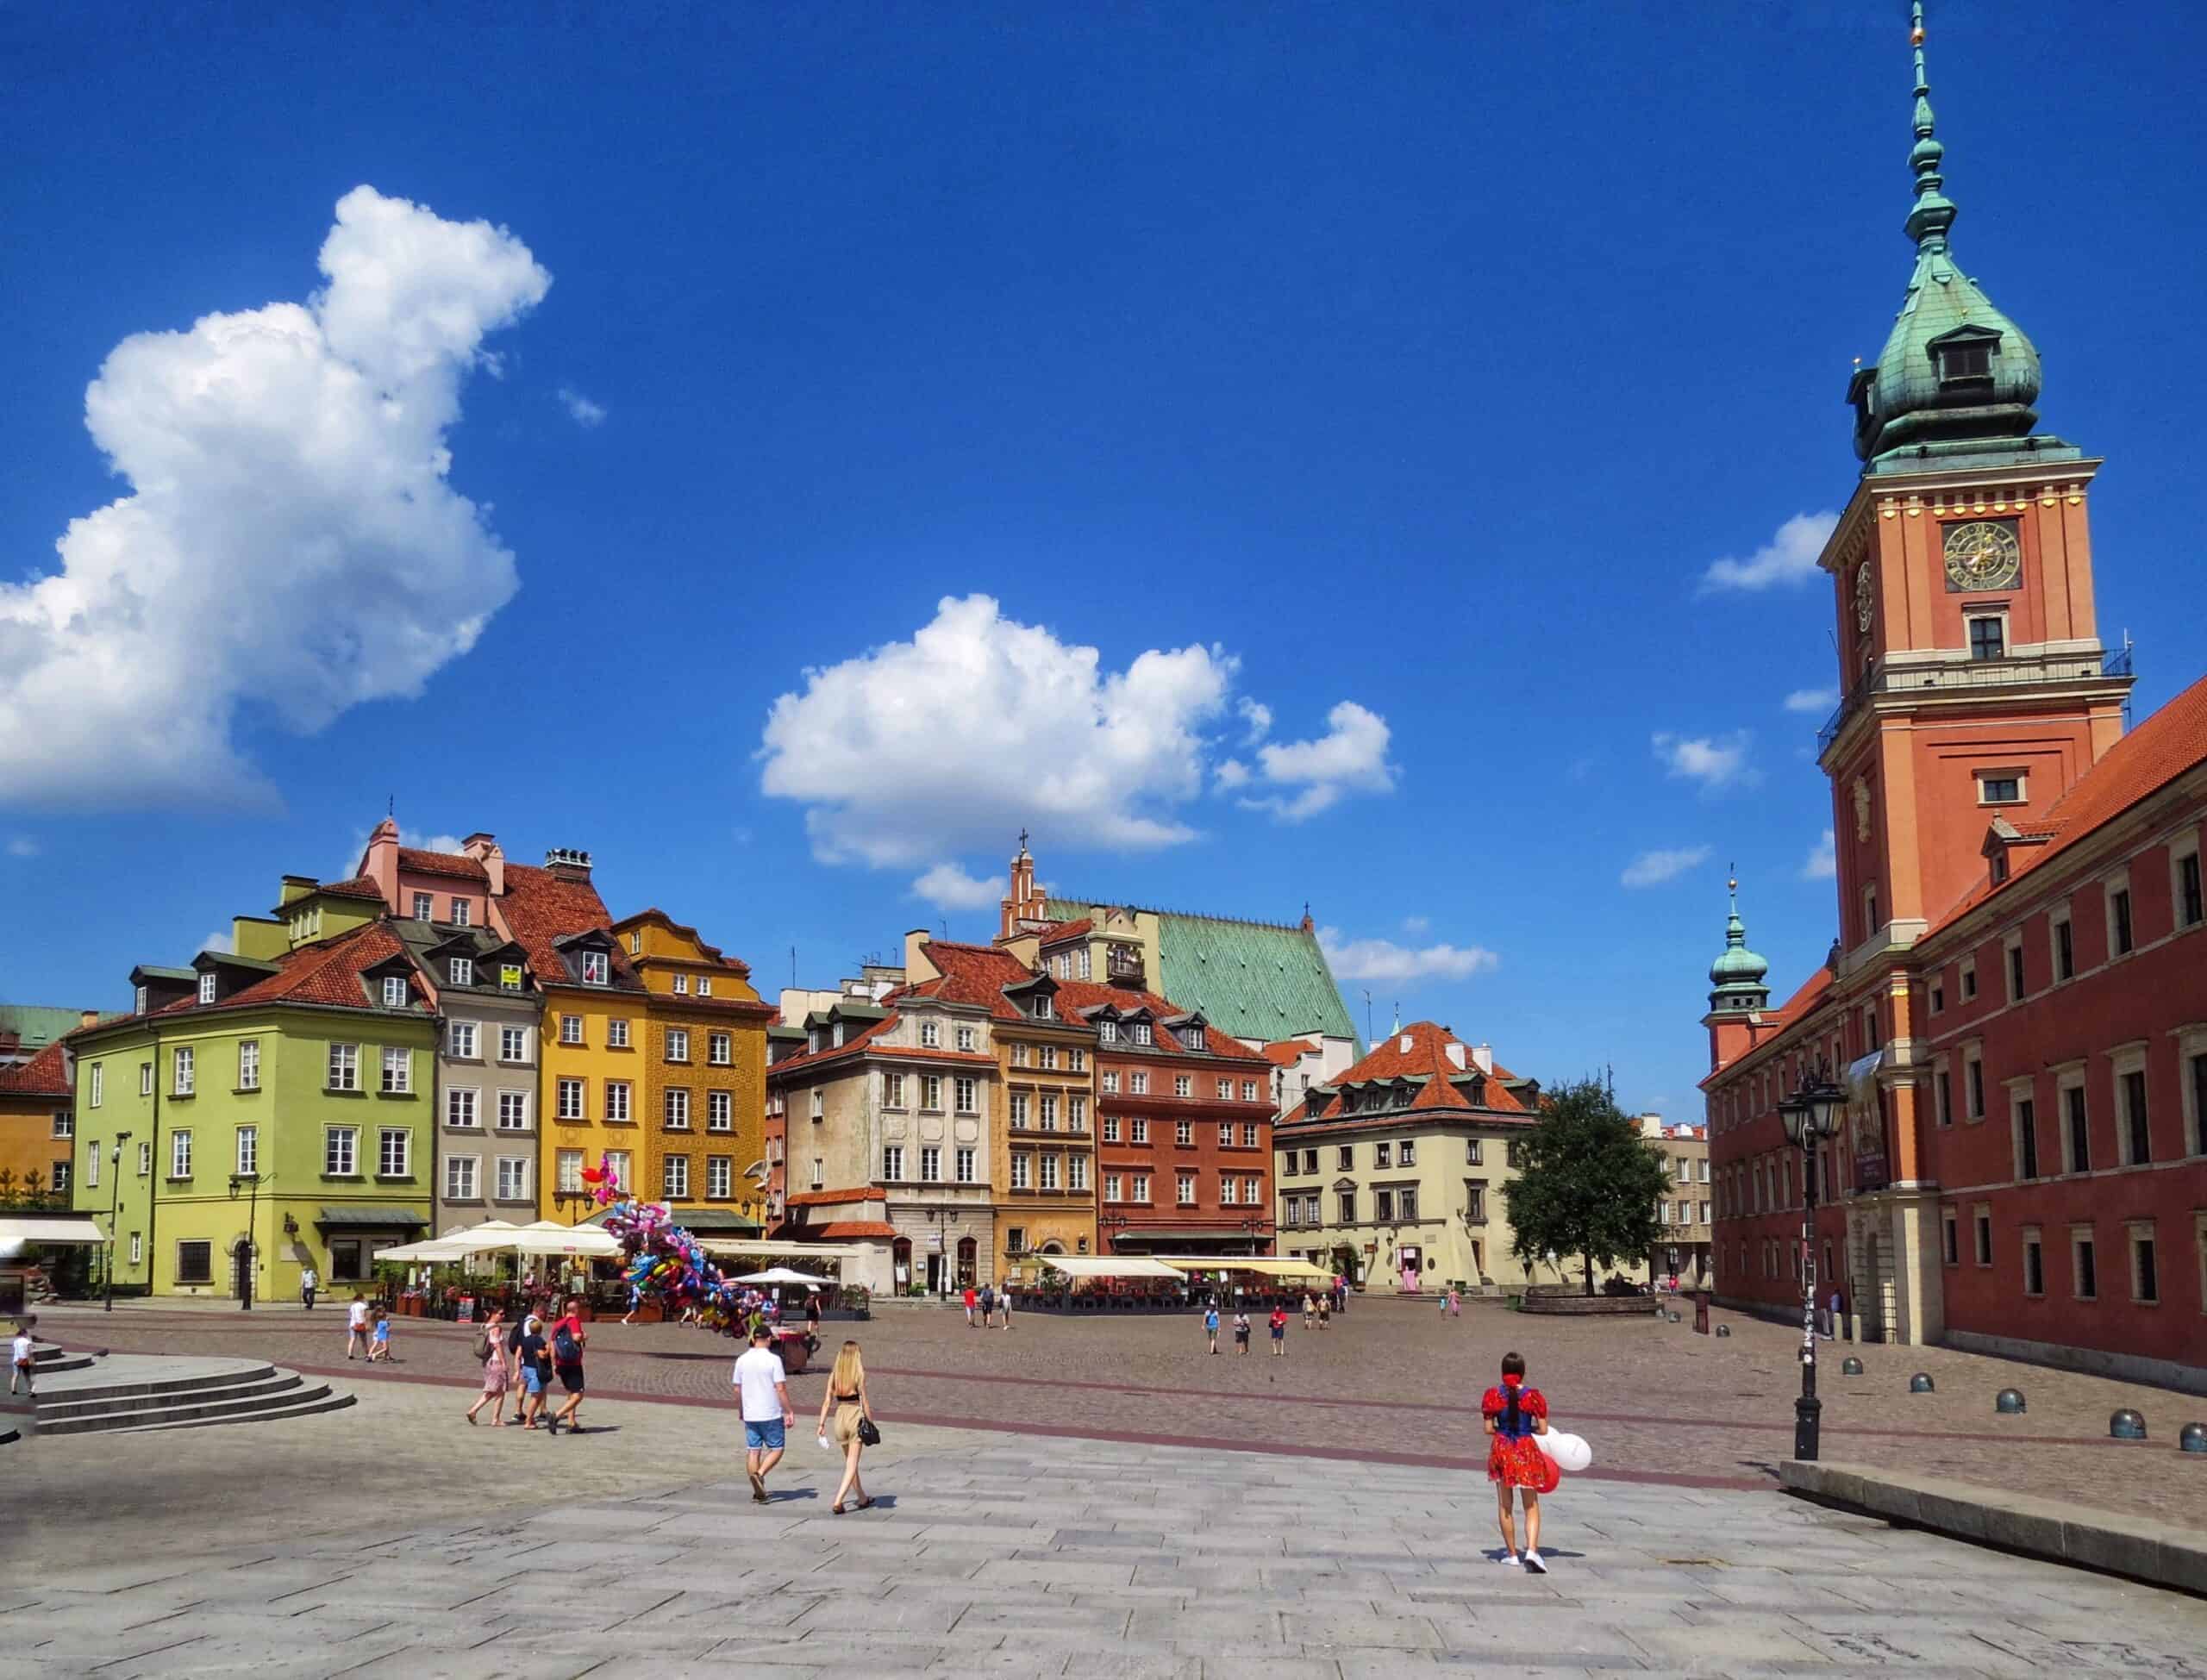 Warsaw old town in Poland